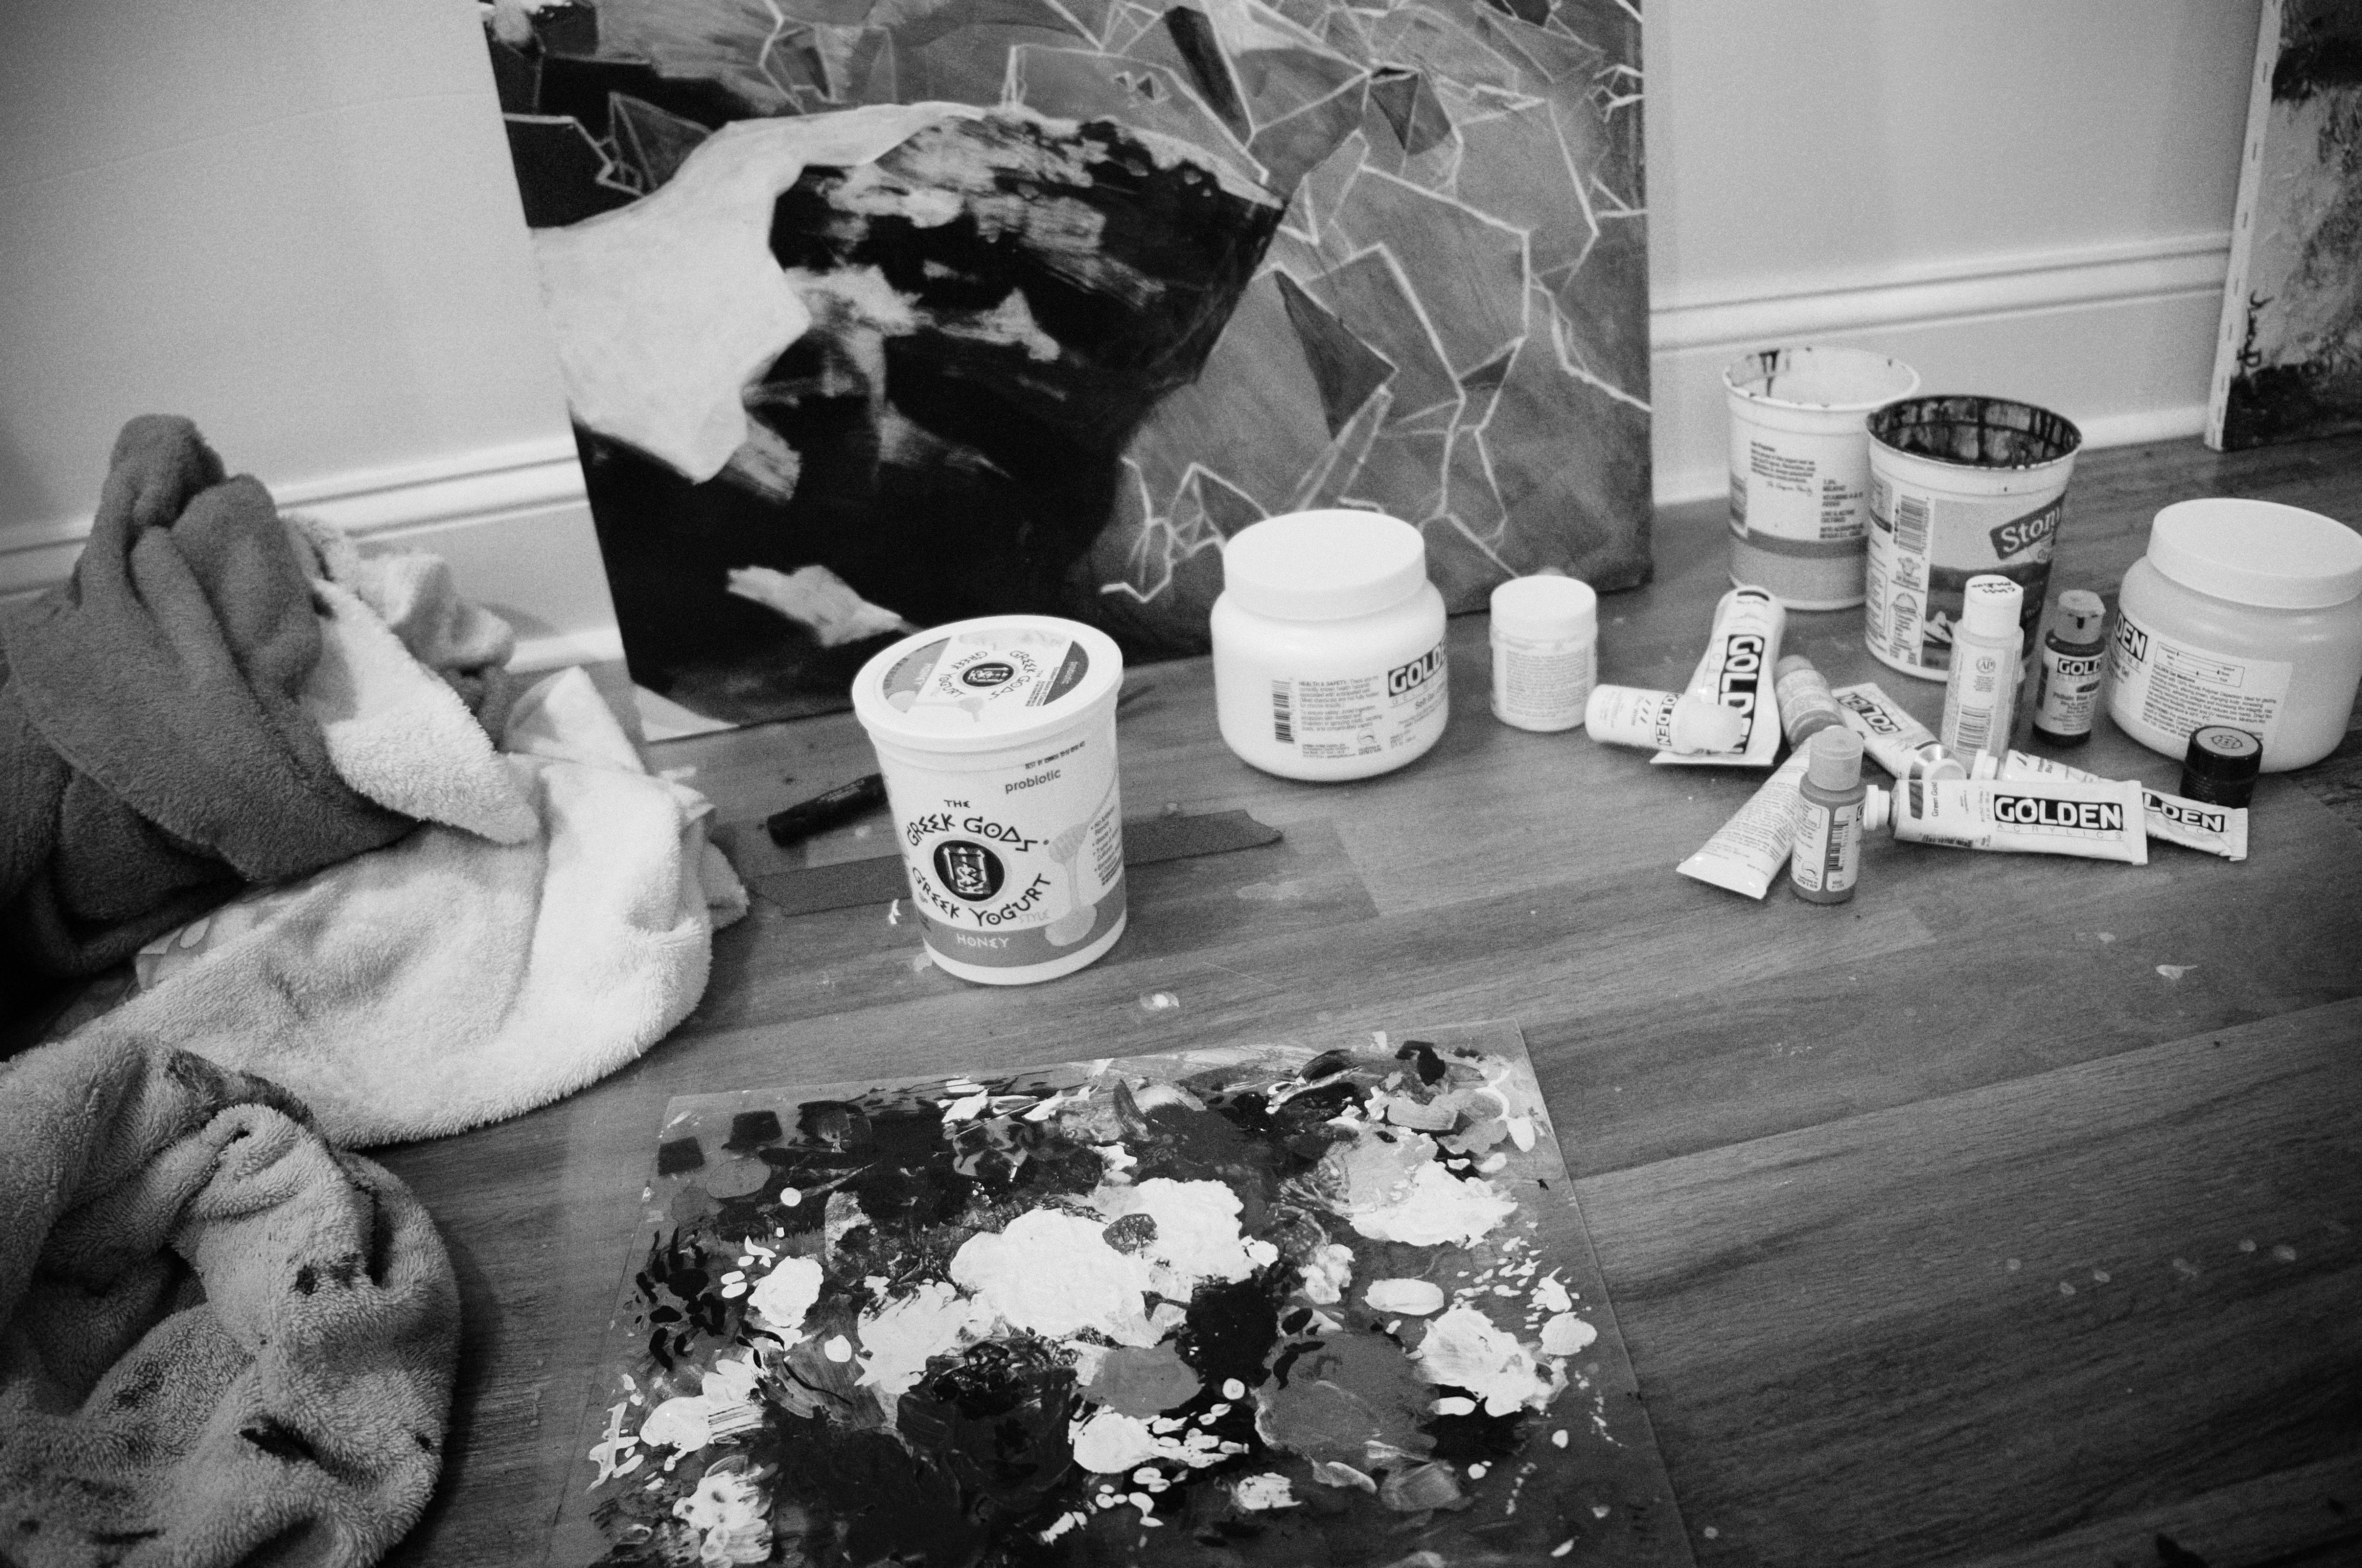 My studio, with Frozen Waterfall in the background leaning against the wall, and paint cans strewn on the floor.